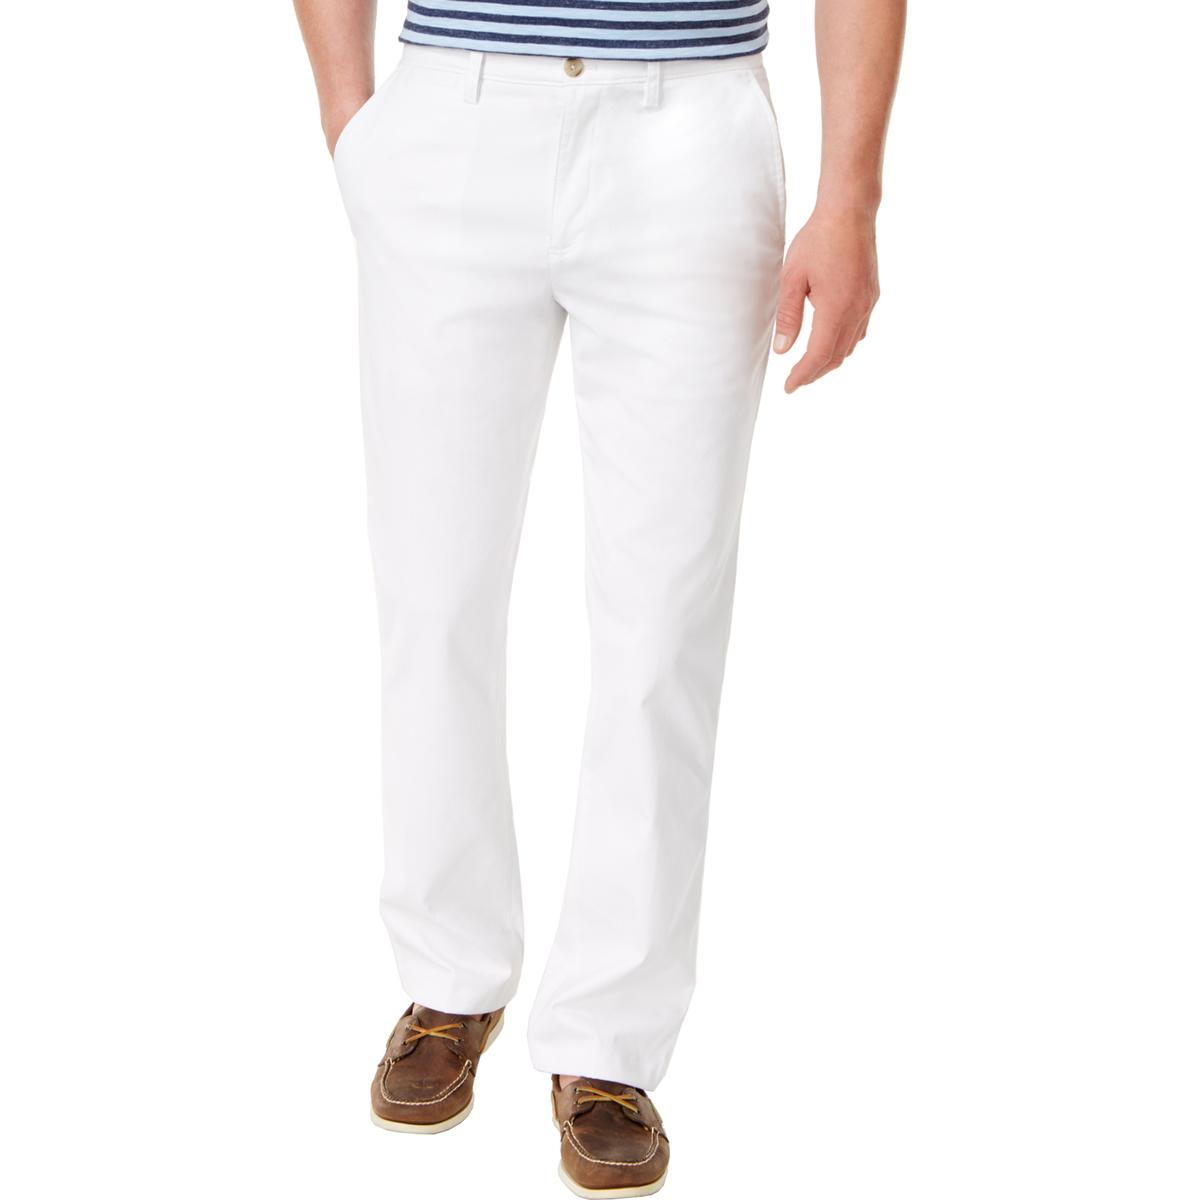 Club Room Mens White Flat Front Button-Zip Fly Chino Pants 32/32 BHFO ...